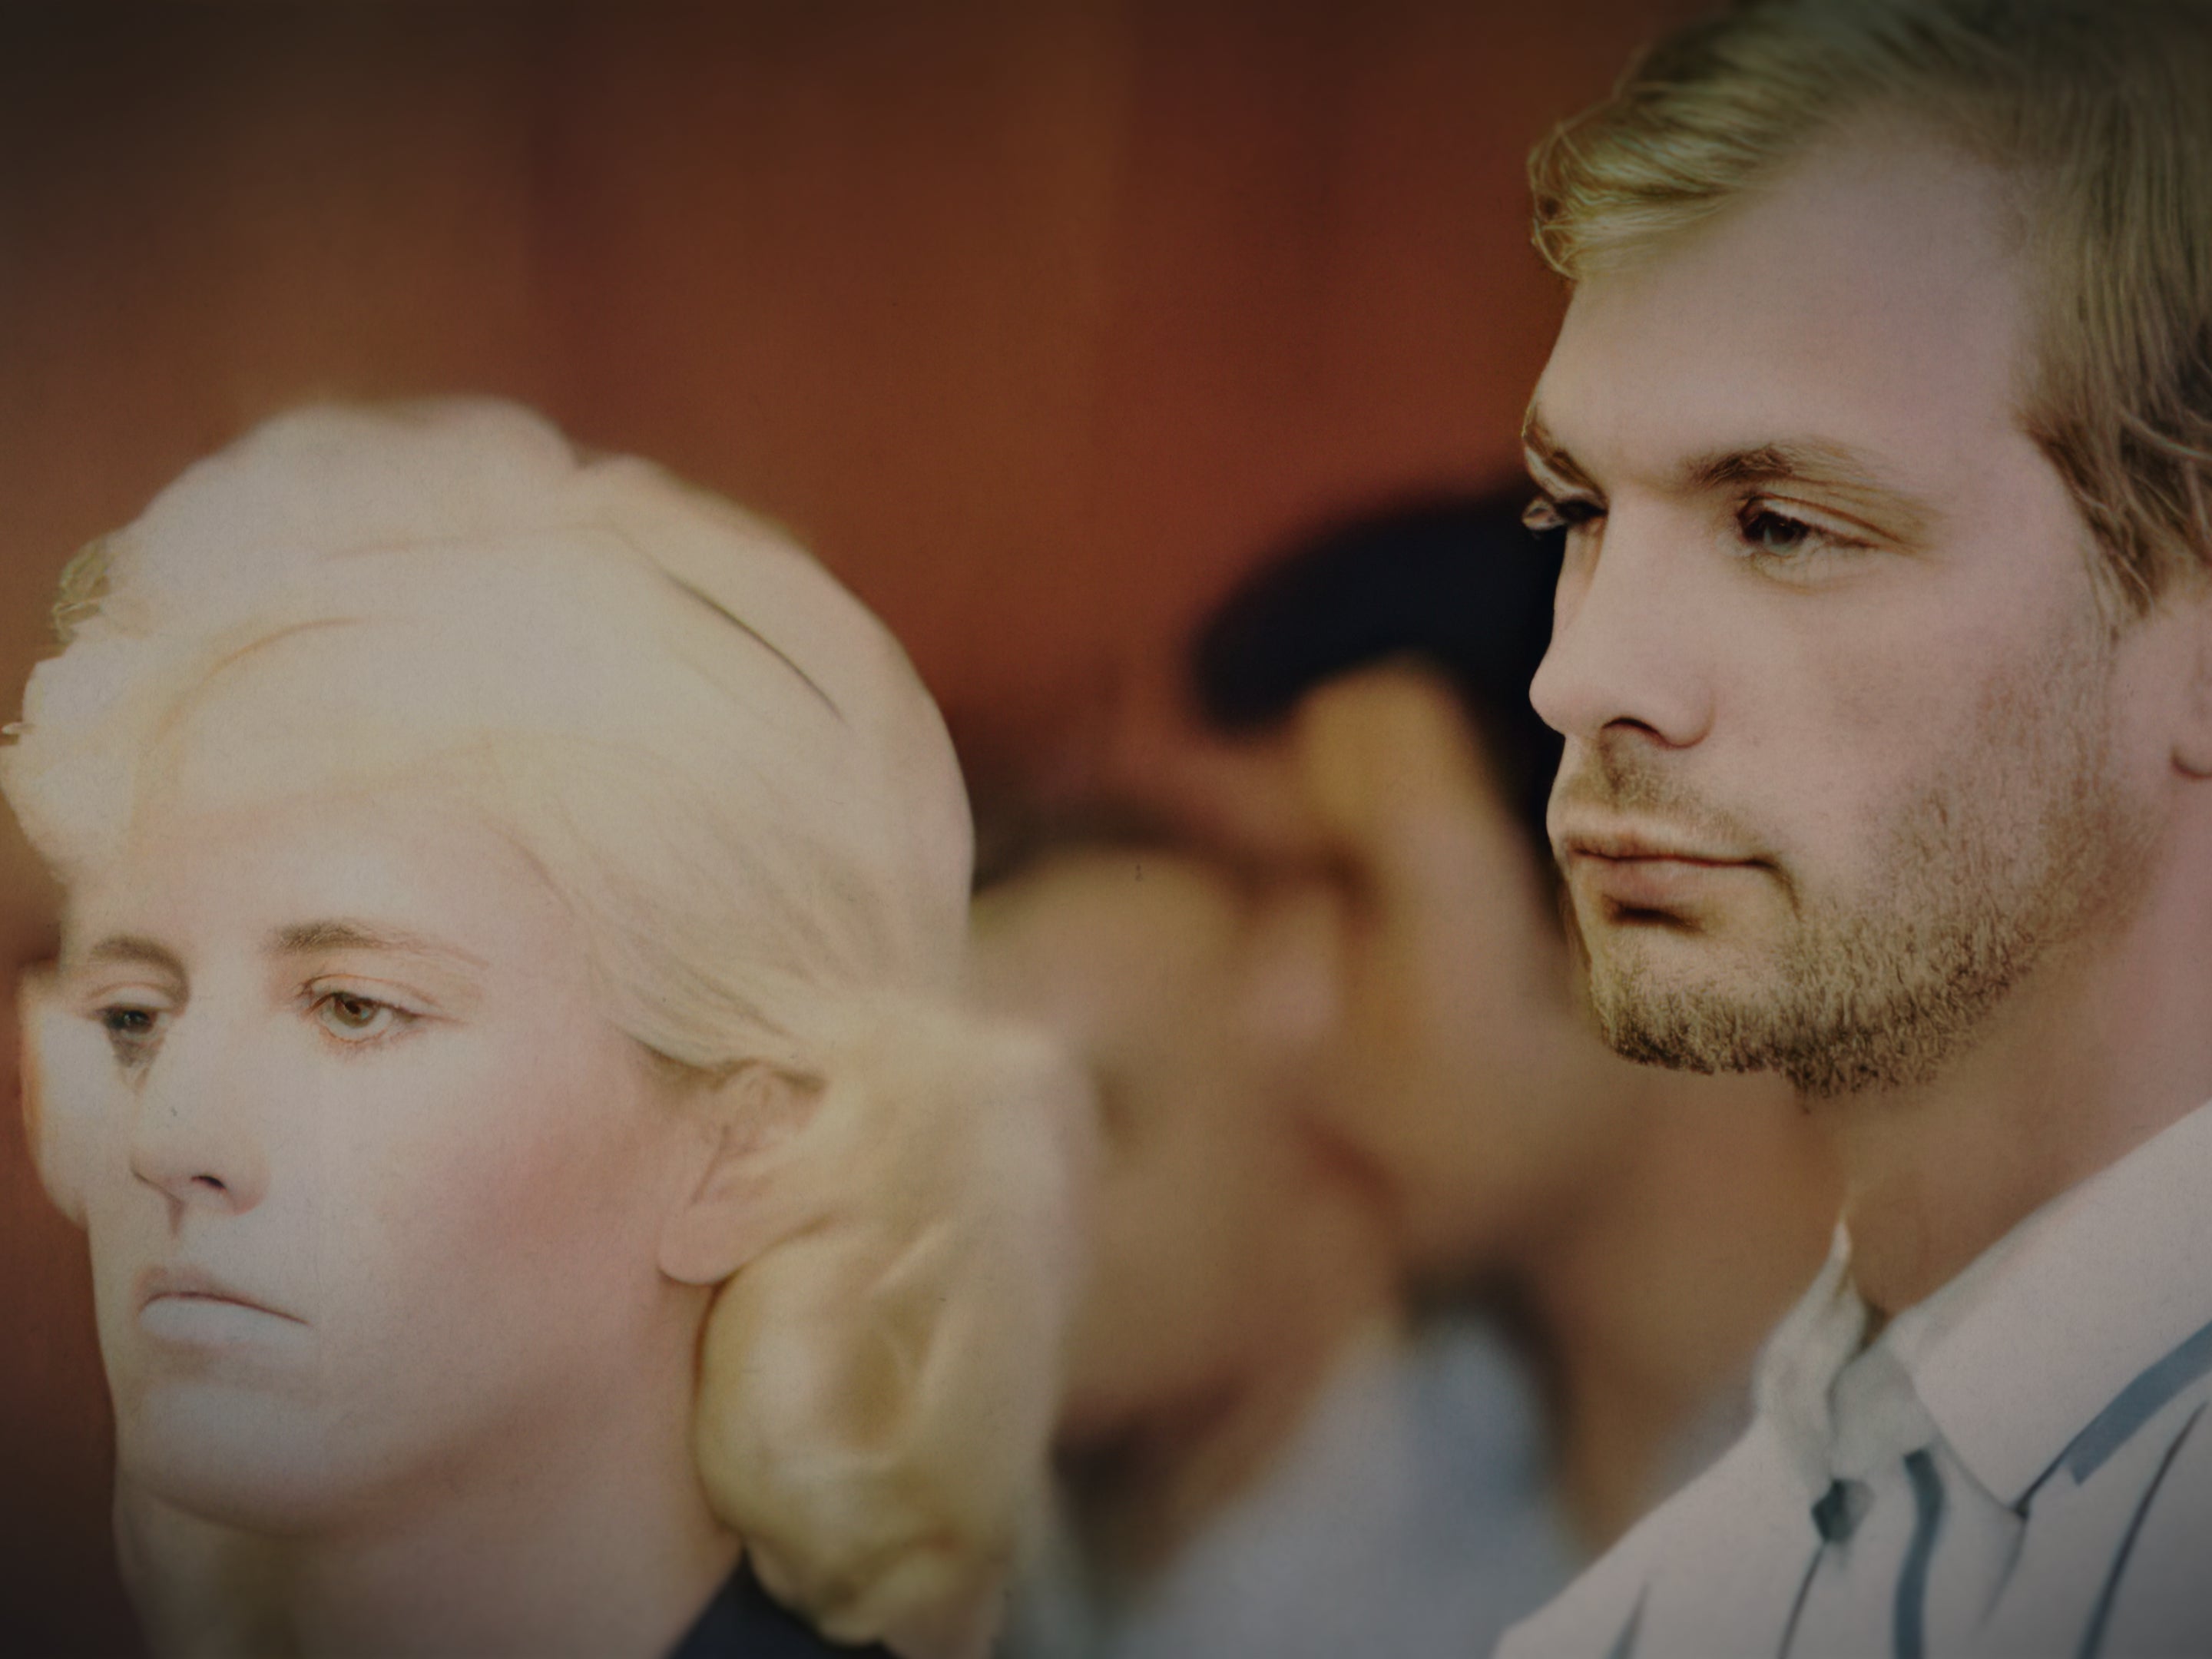 Wendy Patrickus and Jeffrey Dahmer in ‘Conversations With A Killer: The Jeffrey Dahmer Tapes'